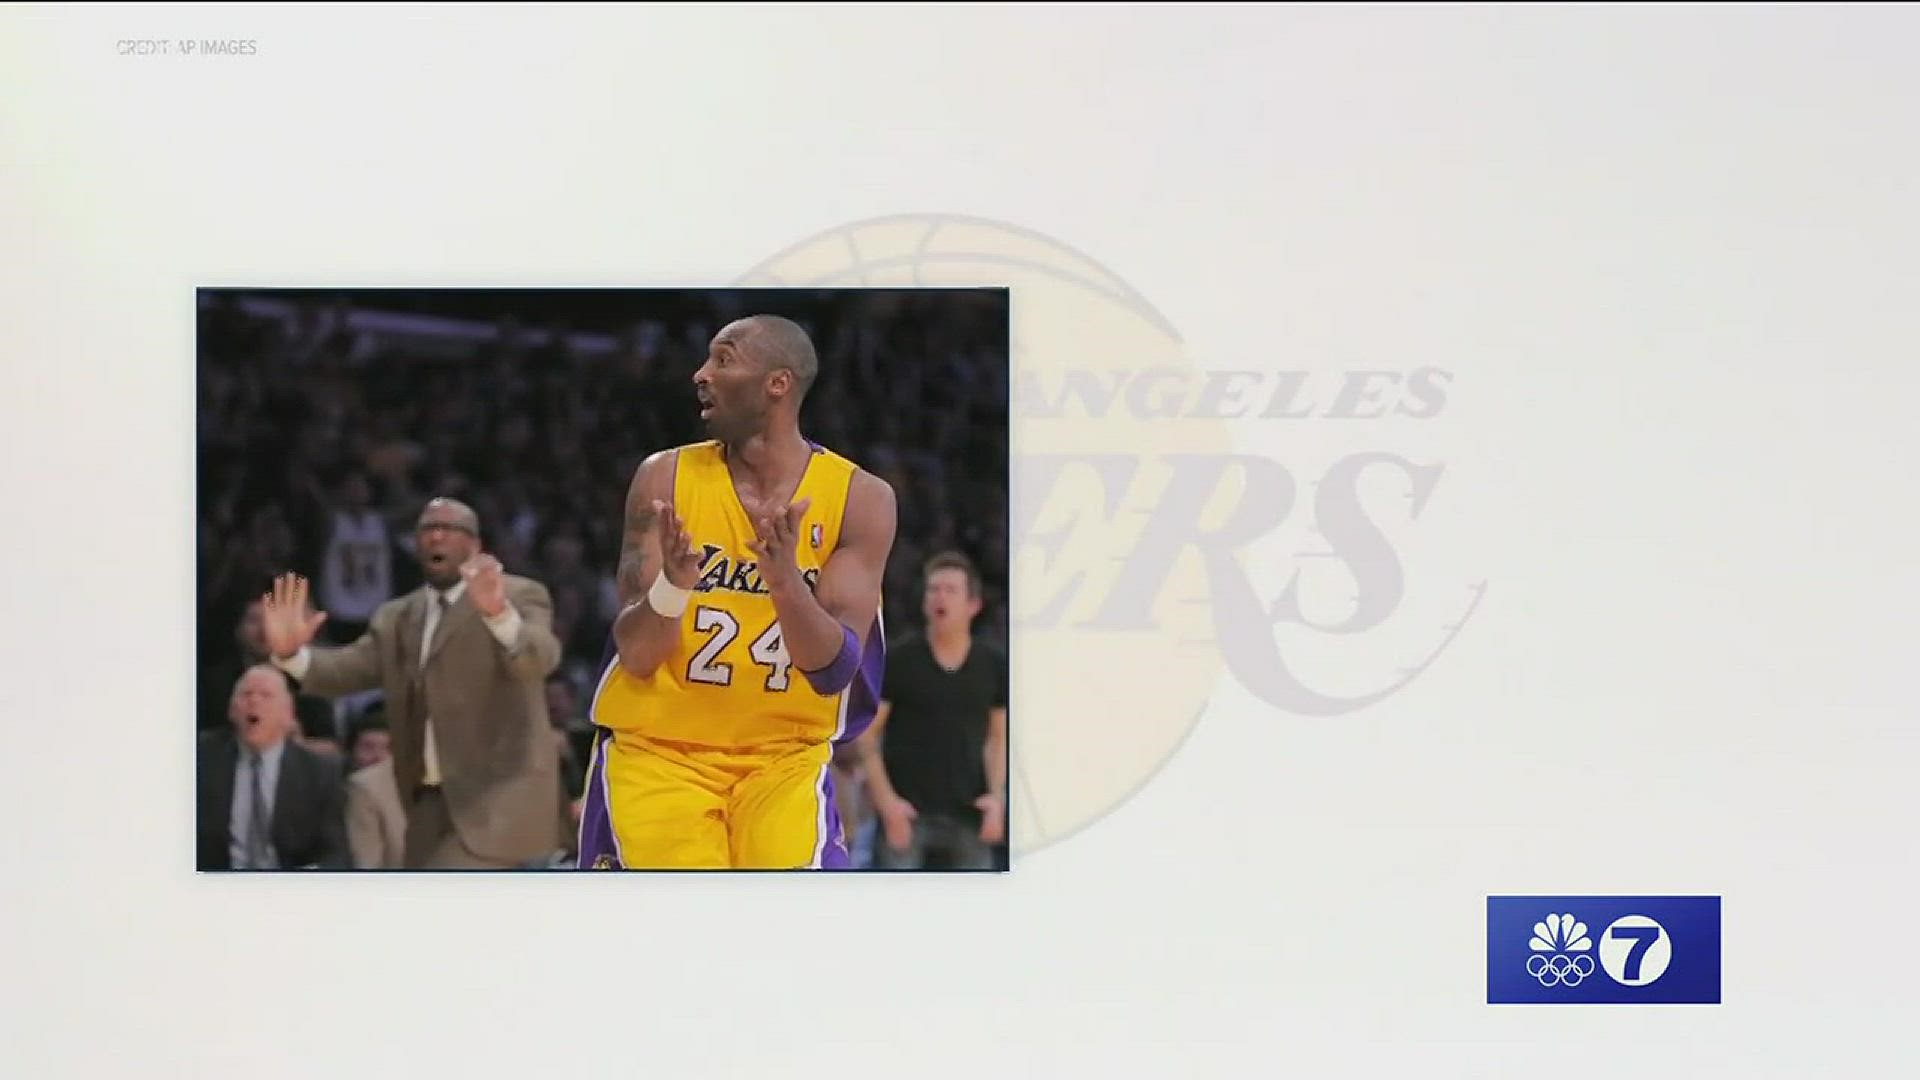 This week's Sunday Sports Extra is a special report on remembering the life and legacy of NBA great, Kobe Bryant, who died last Sunday.